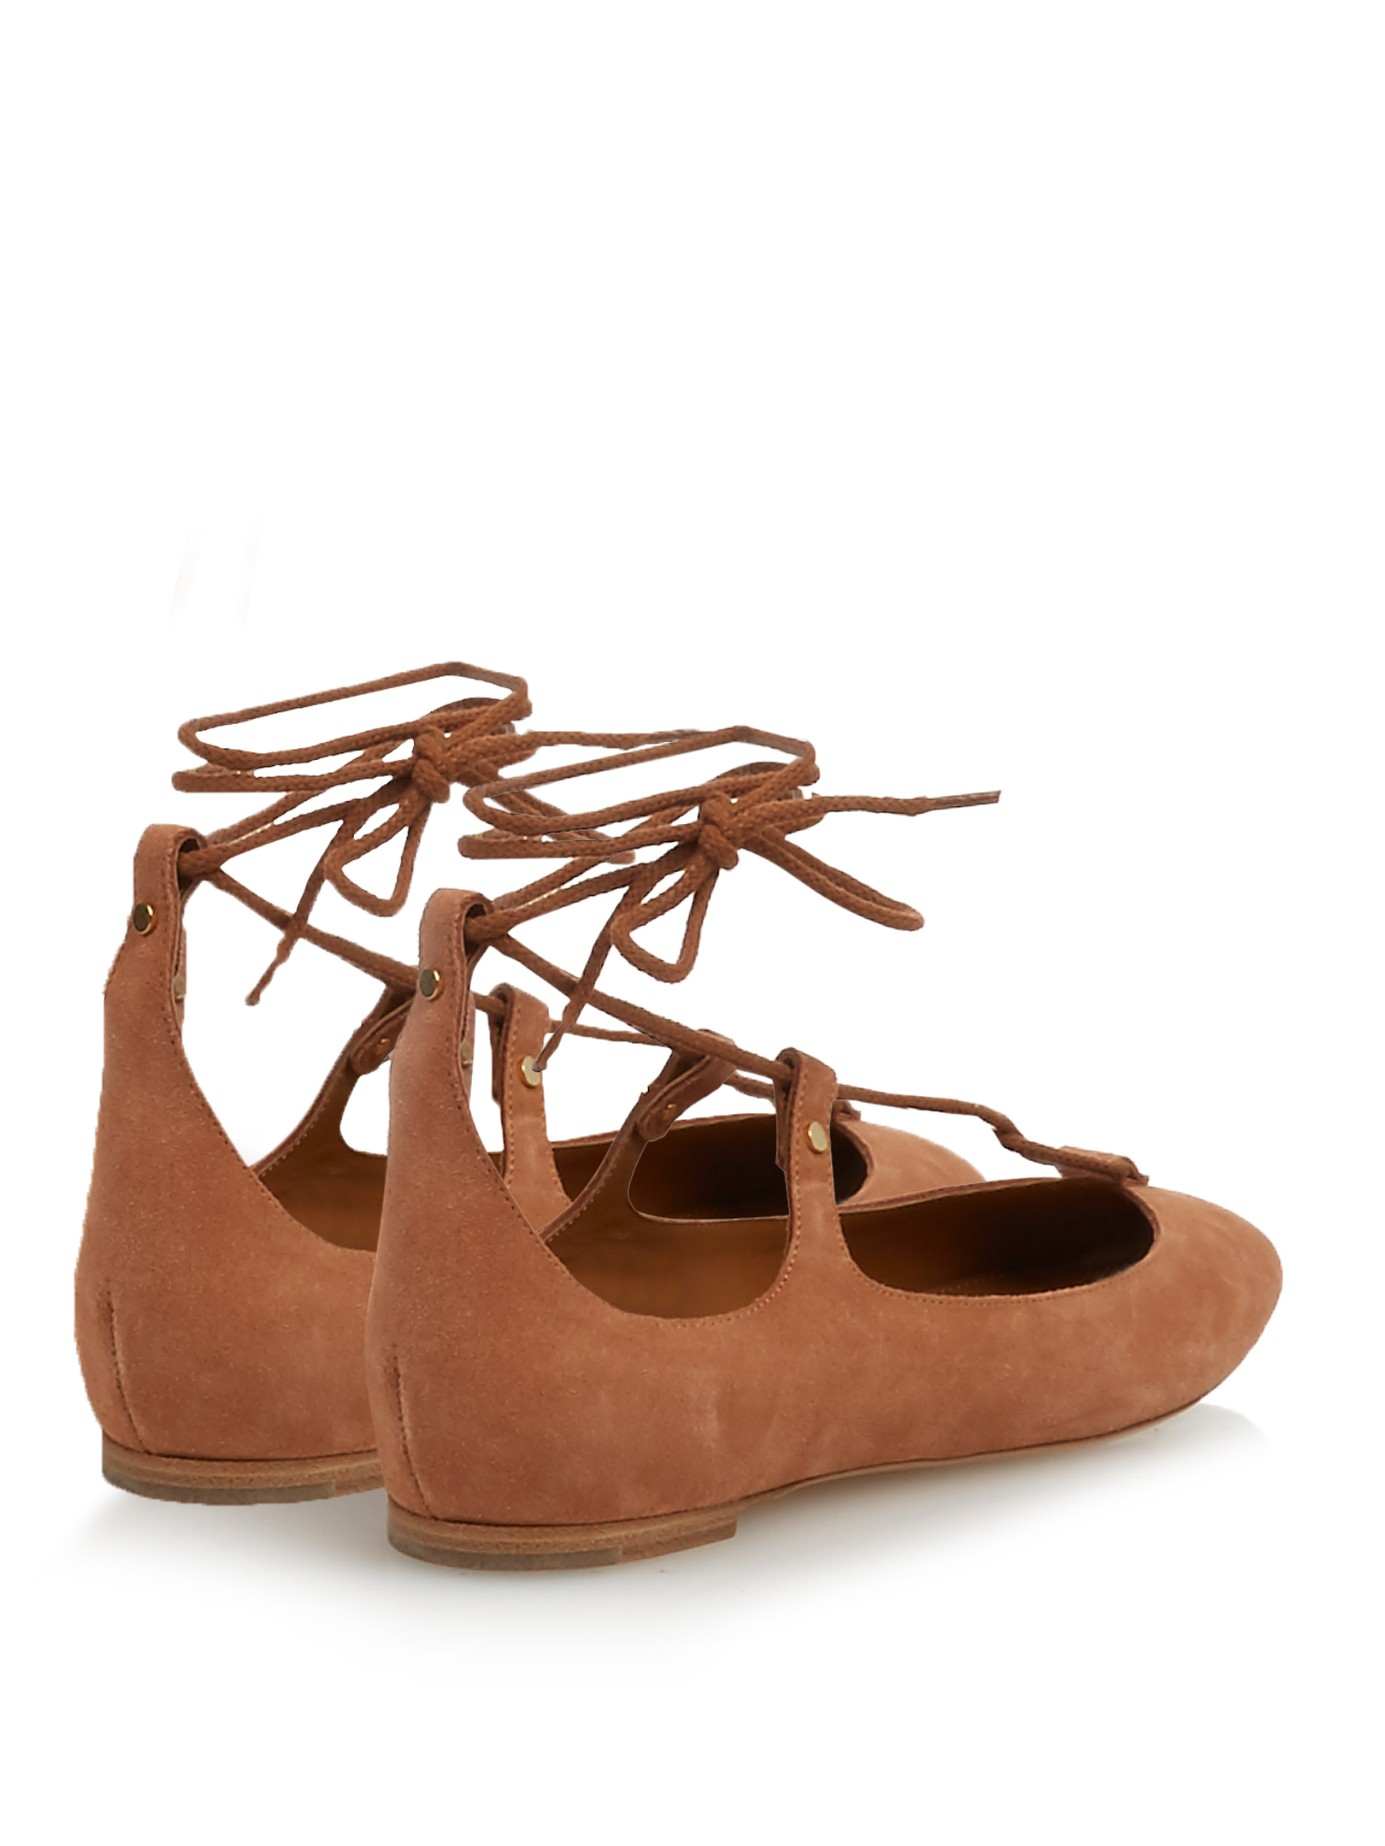 Lyst - Chloé Lace-up Suede Ballet Flats in Brown